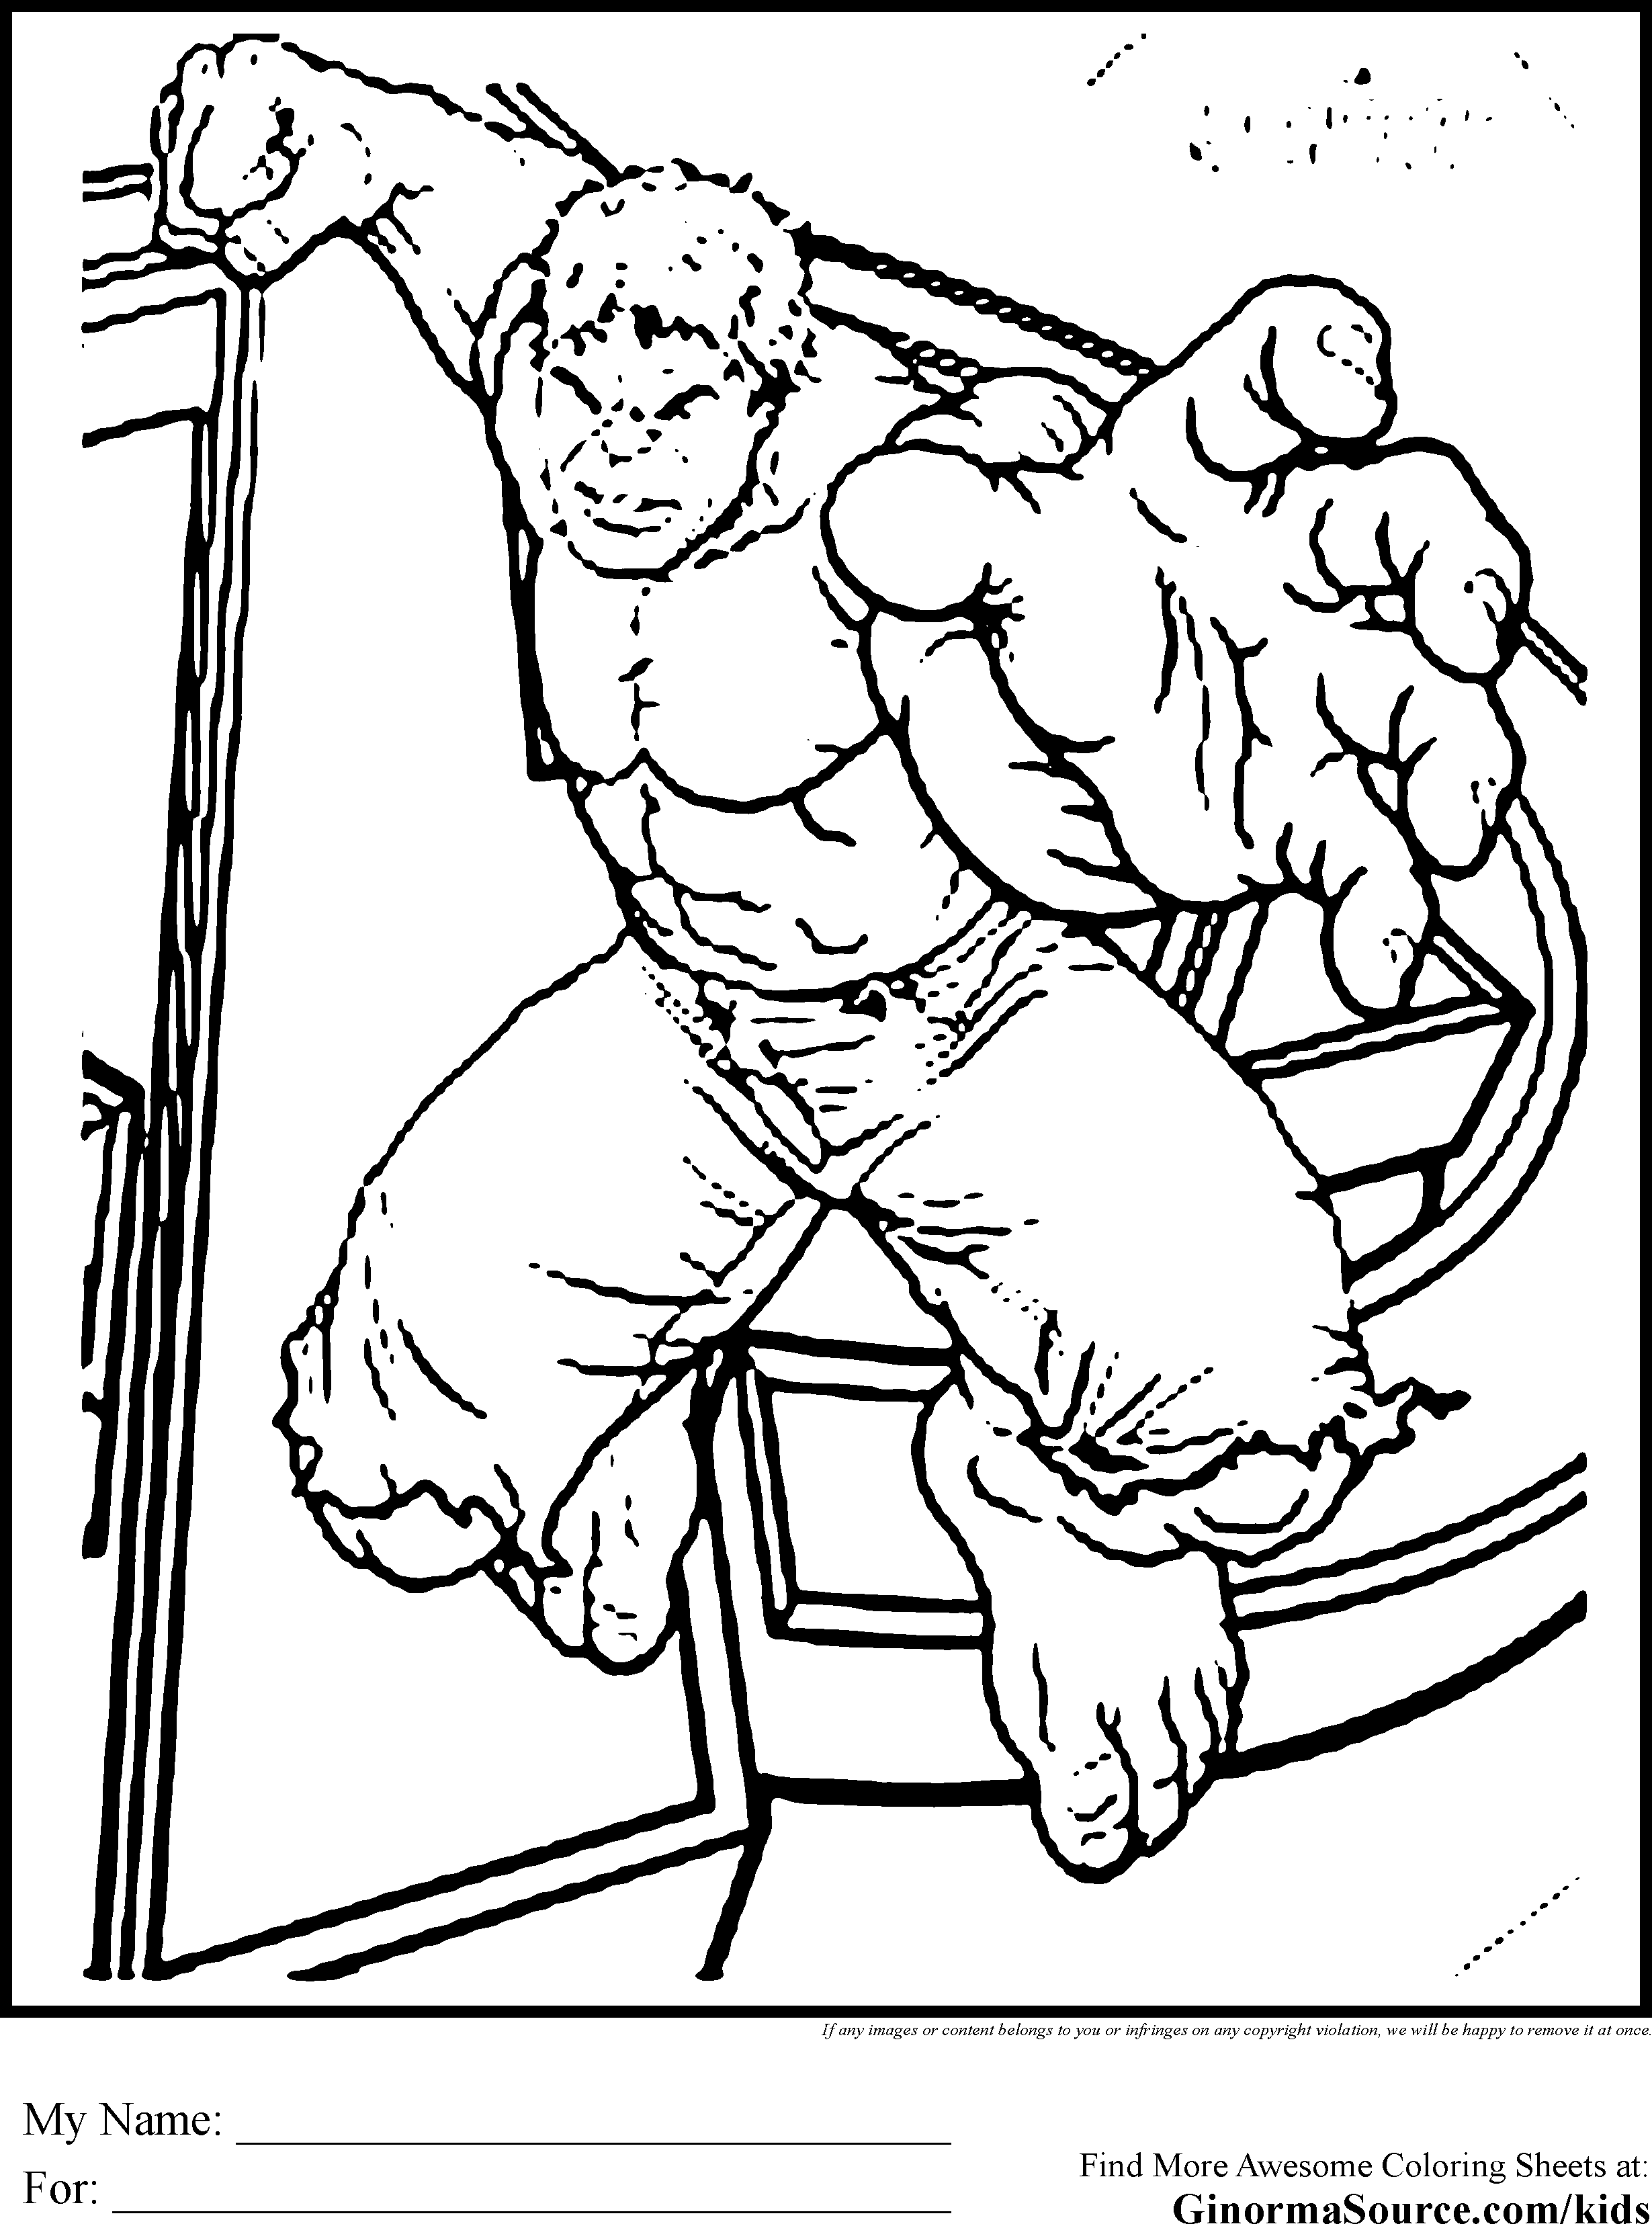 20 Pics Of Baby Avengers Coloring Pages   Baby Marvel Comics ...